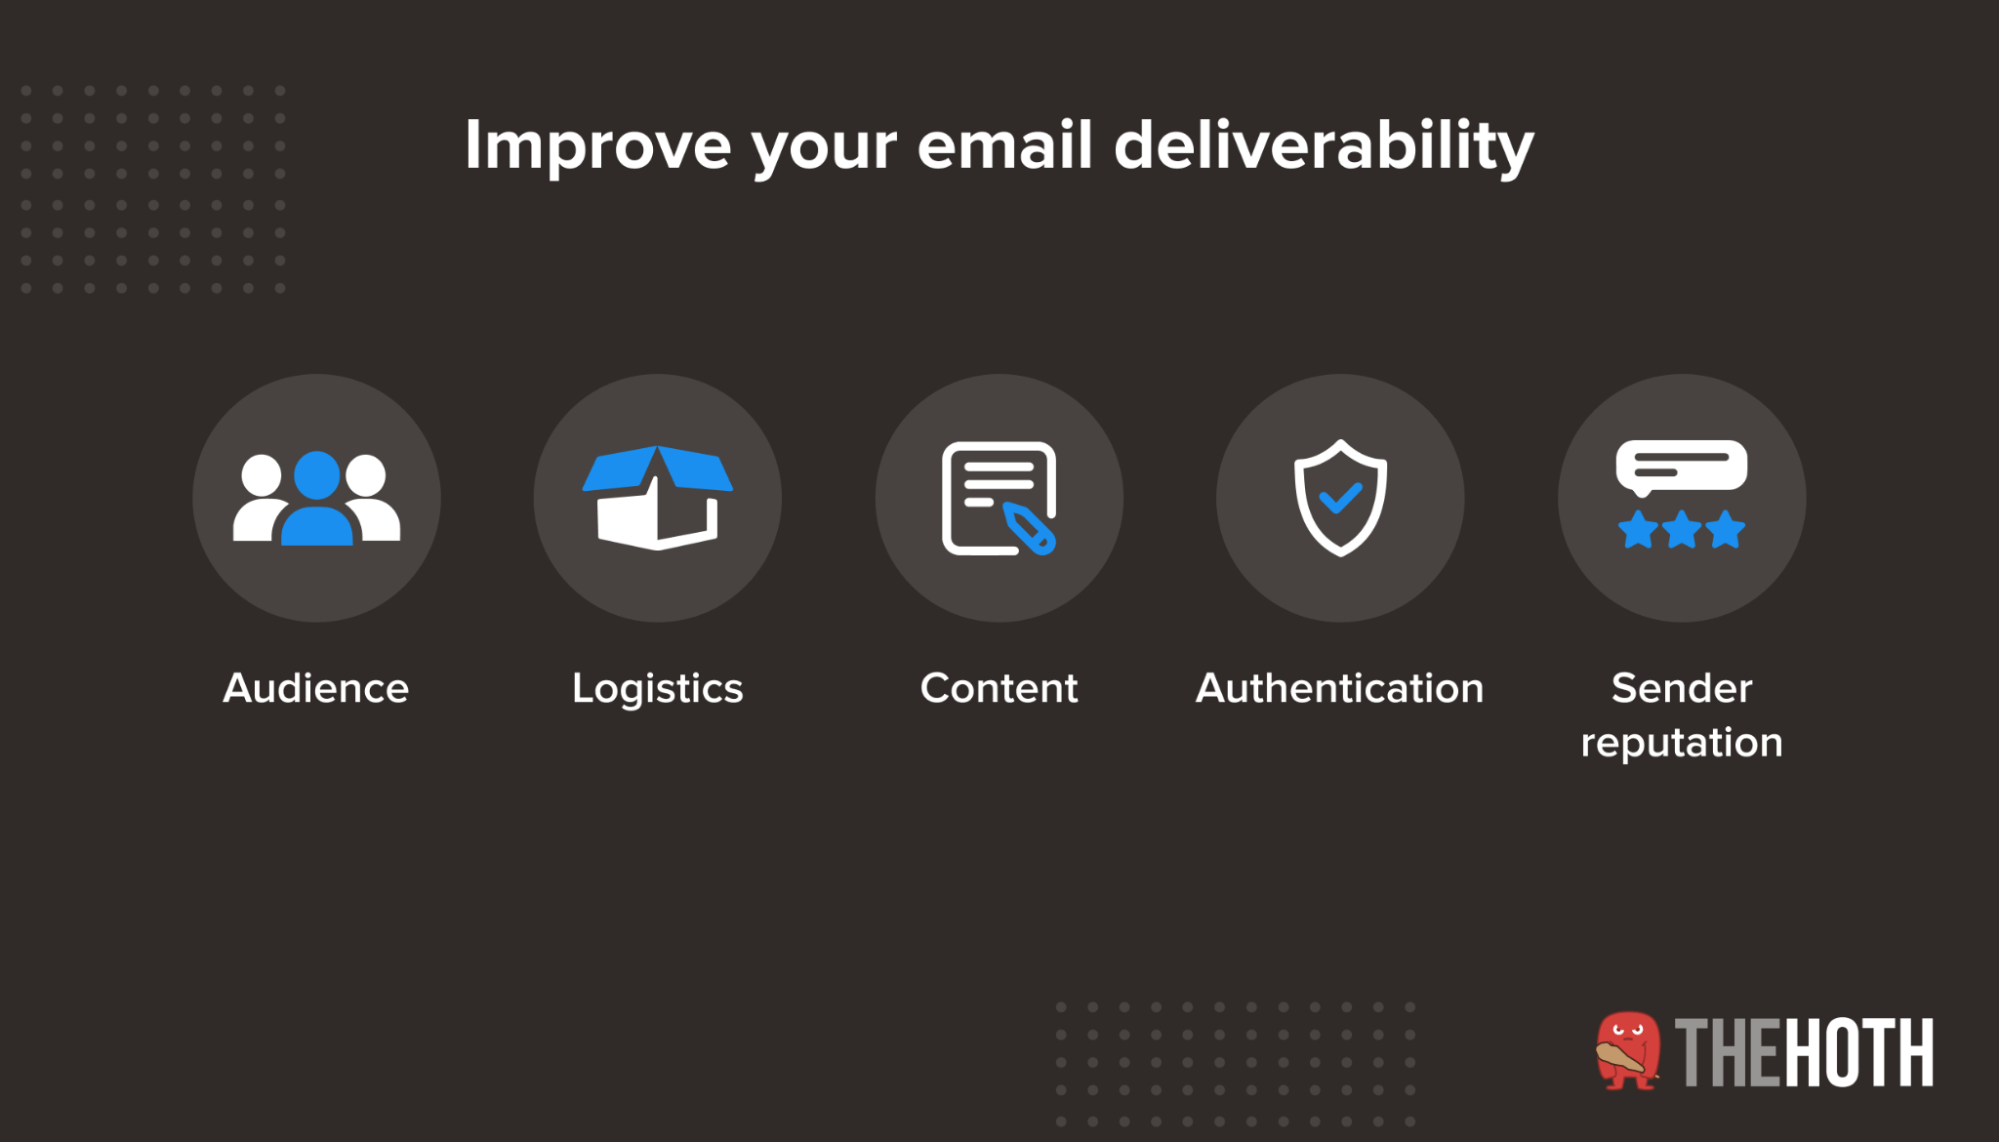 Boost email deliverability